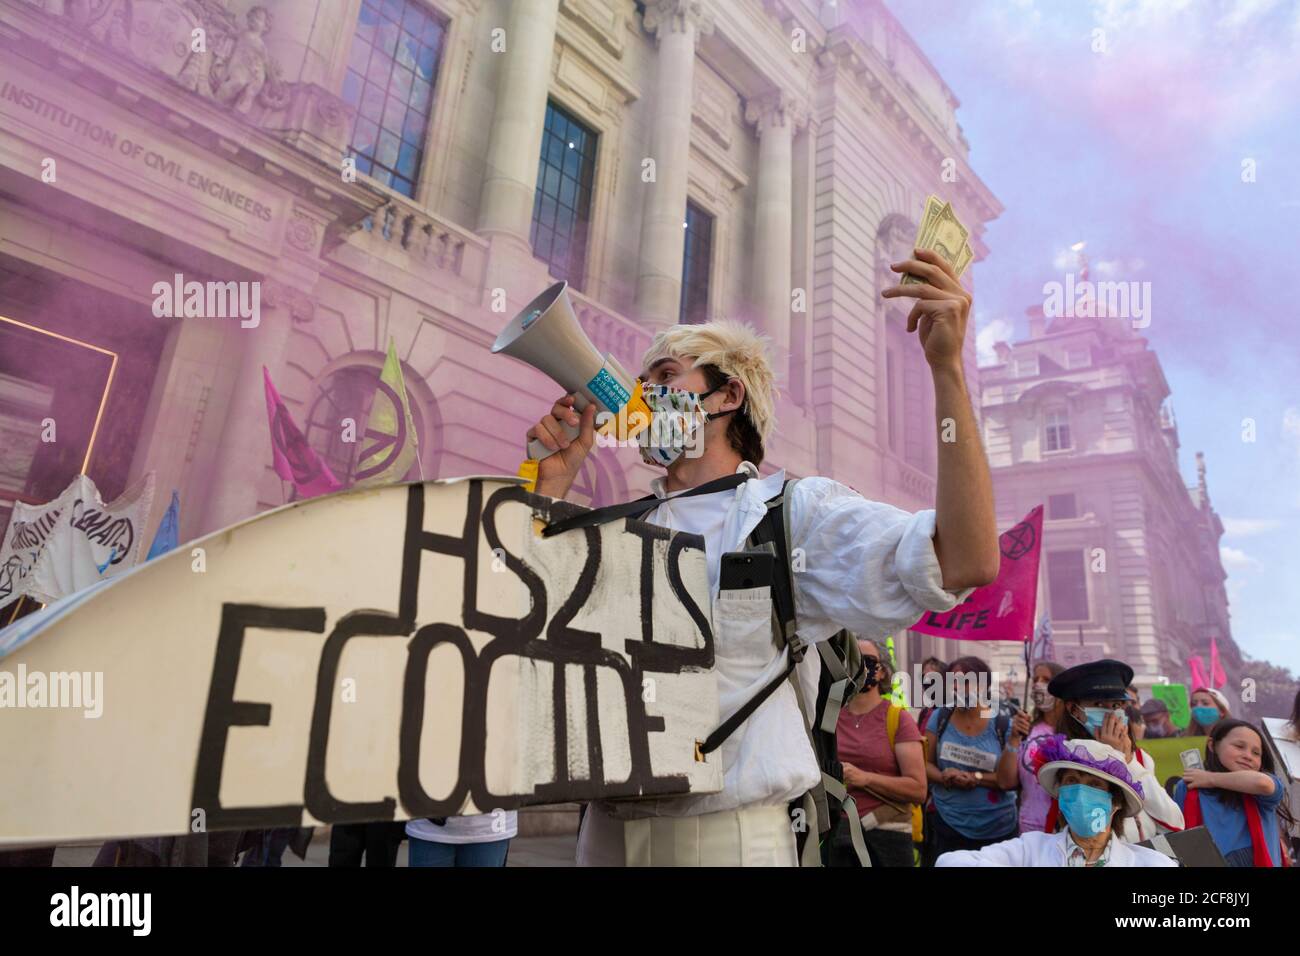 A protester speaking into a megaphone during Extinction Rebellion demonstration, London, 1 September 2020 Stock Photo